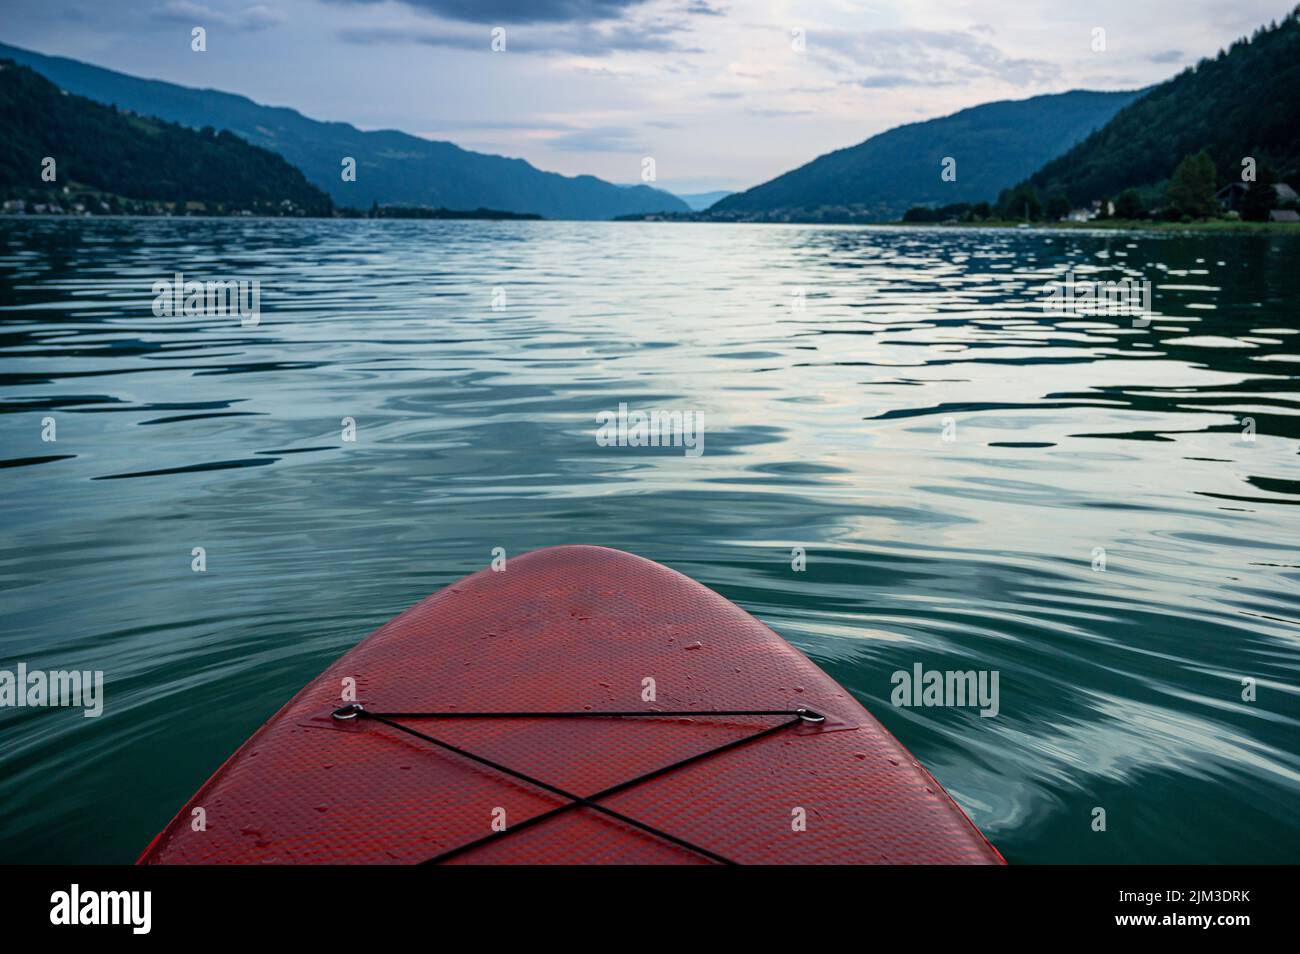 red SUP board on lake Ossiach in Austria with view of mountains in the evening just before a thunderstorm Stock Photo